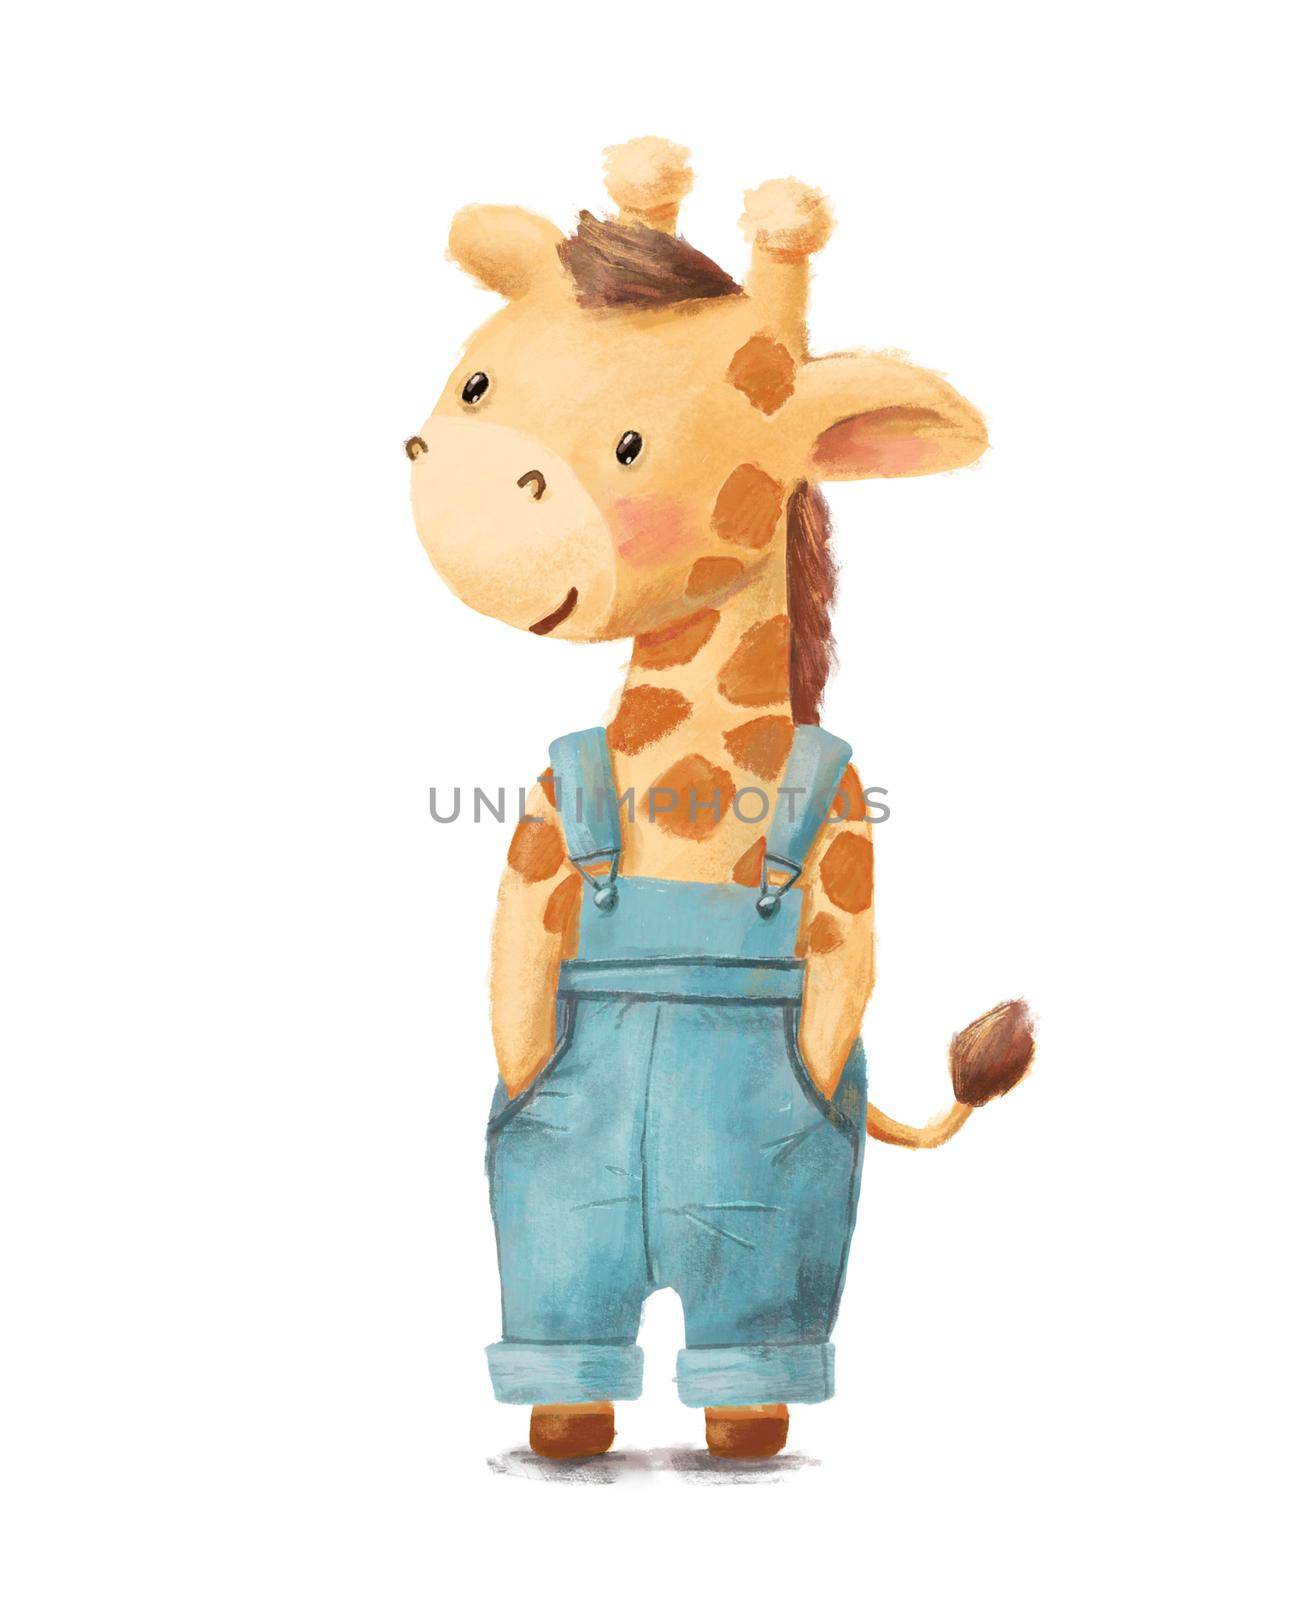 Cute funny standing giraffe in clothes jeans. Character illustration Isolated on white background.